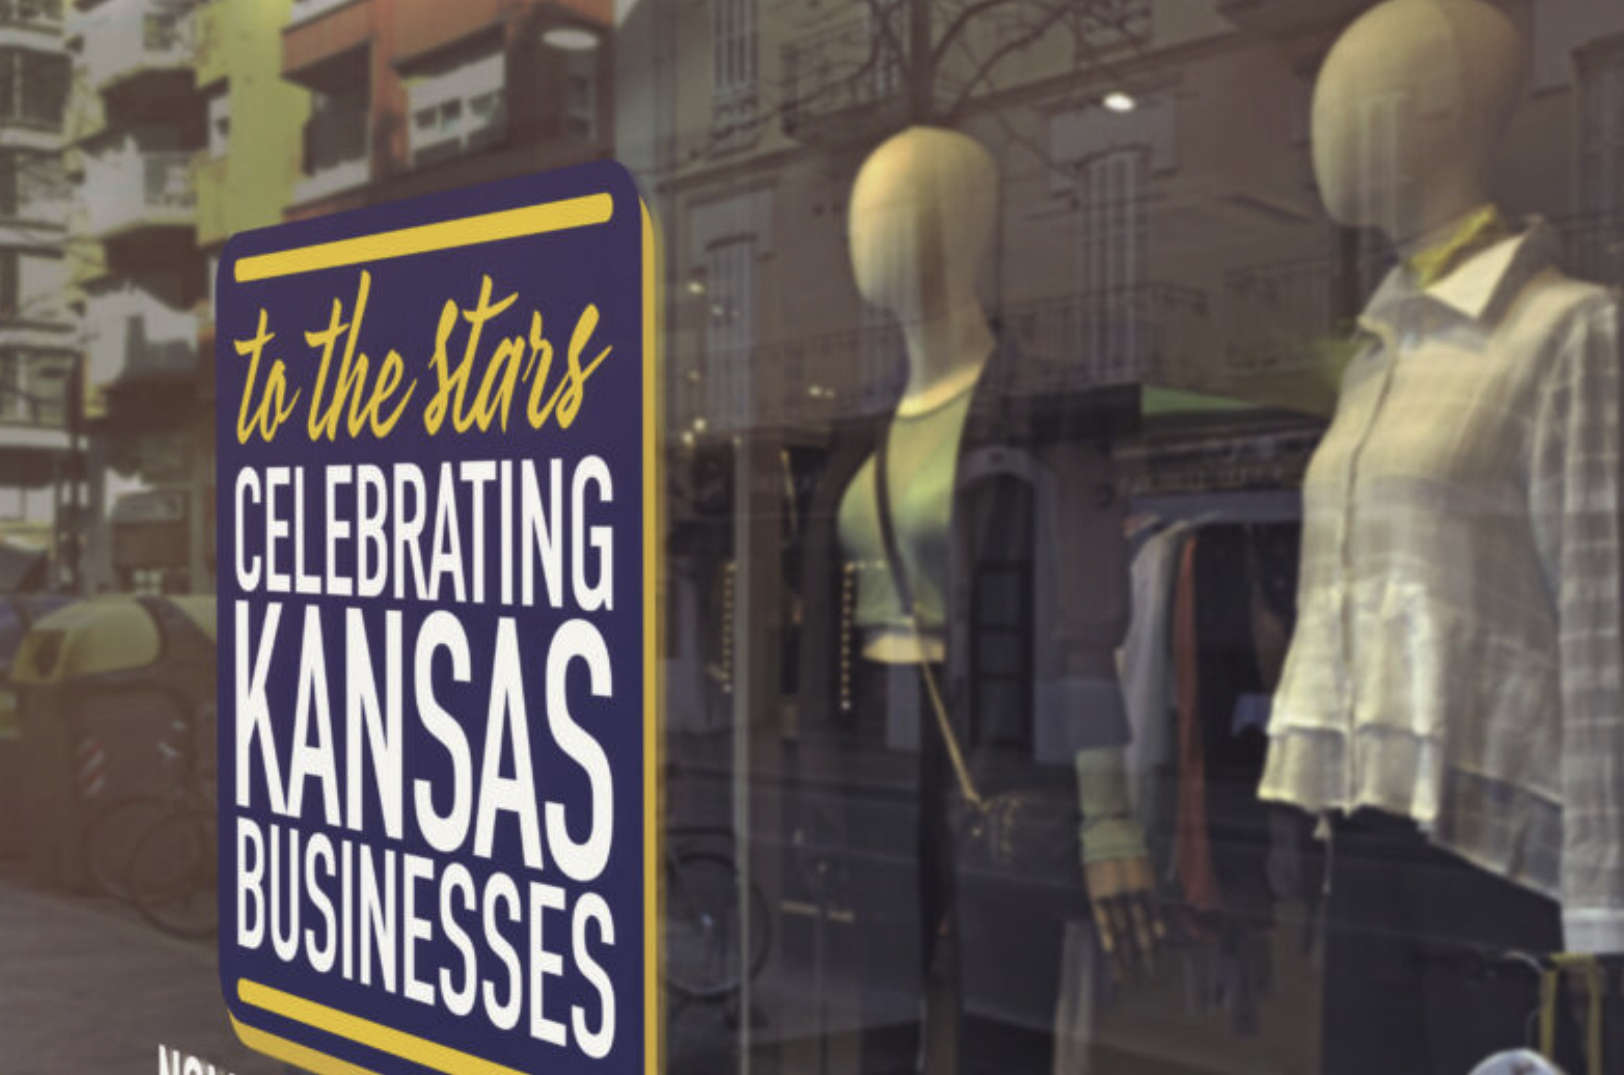 New state awards aim to honor ‘Cool things made in Kansas,’ unconventional talent sources